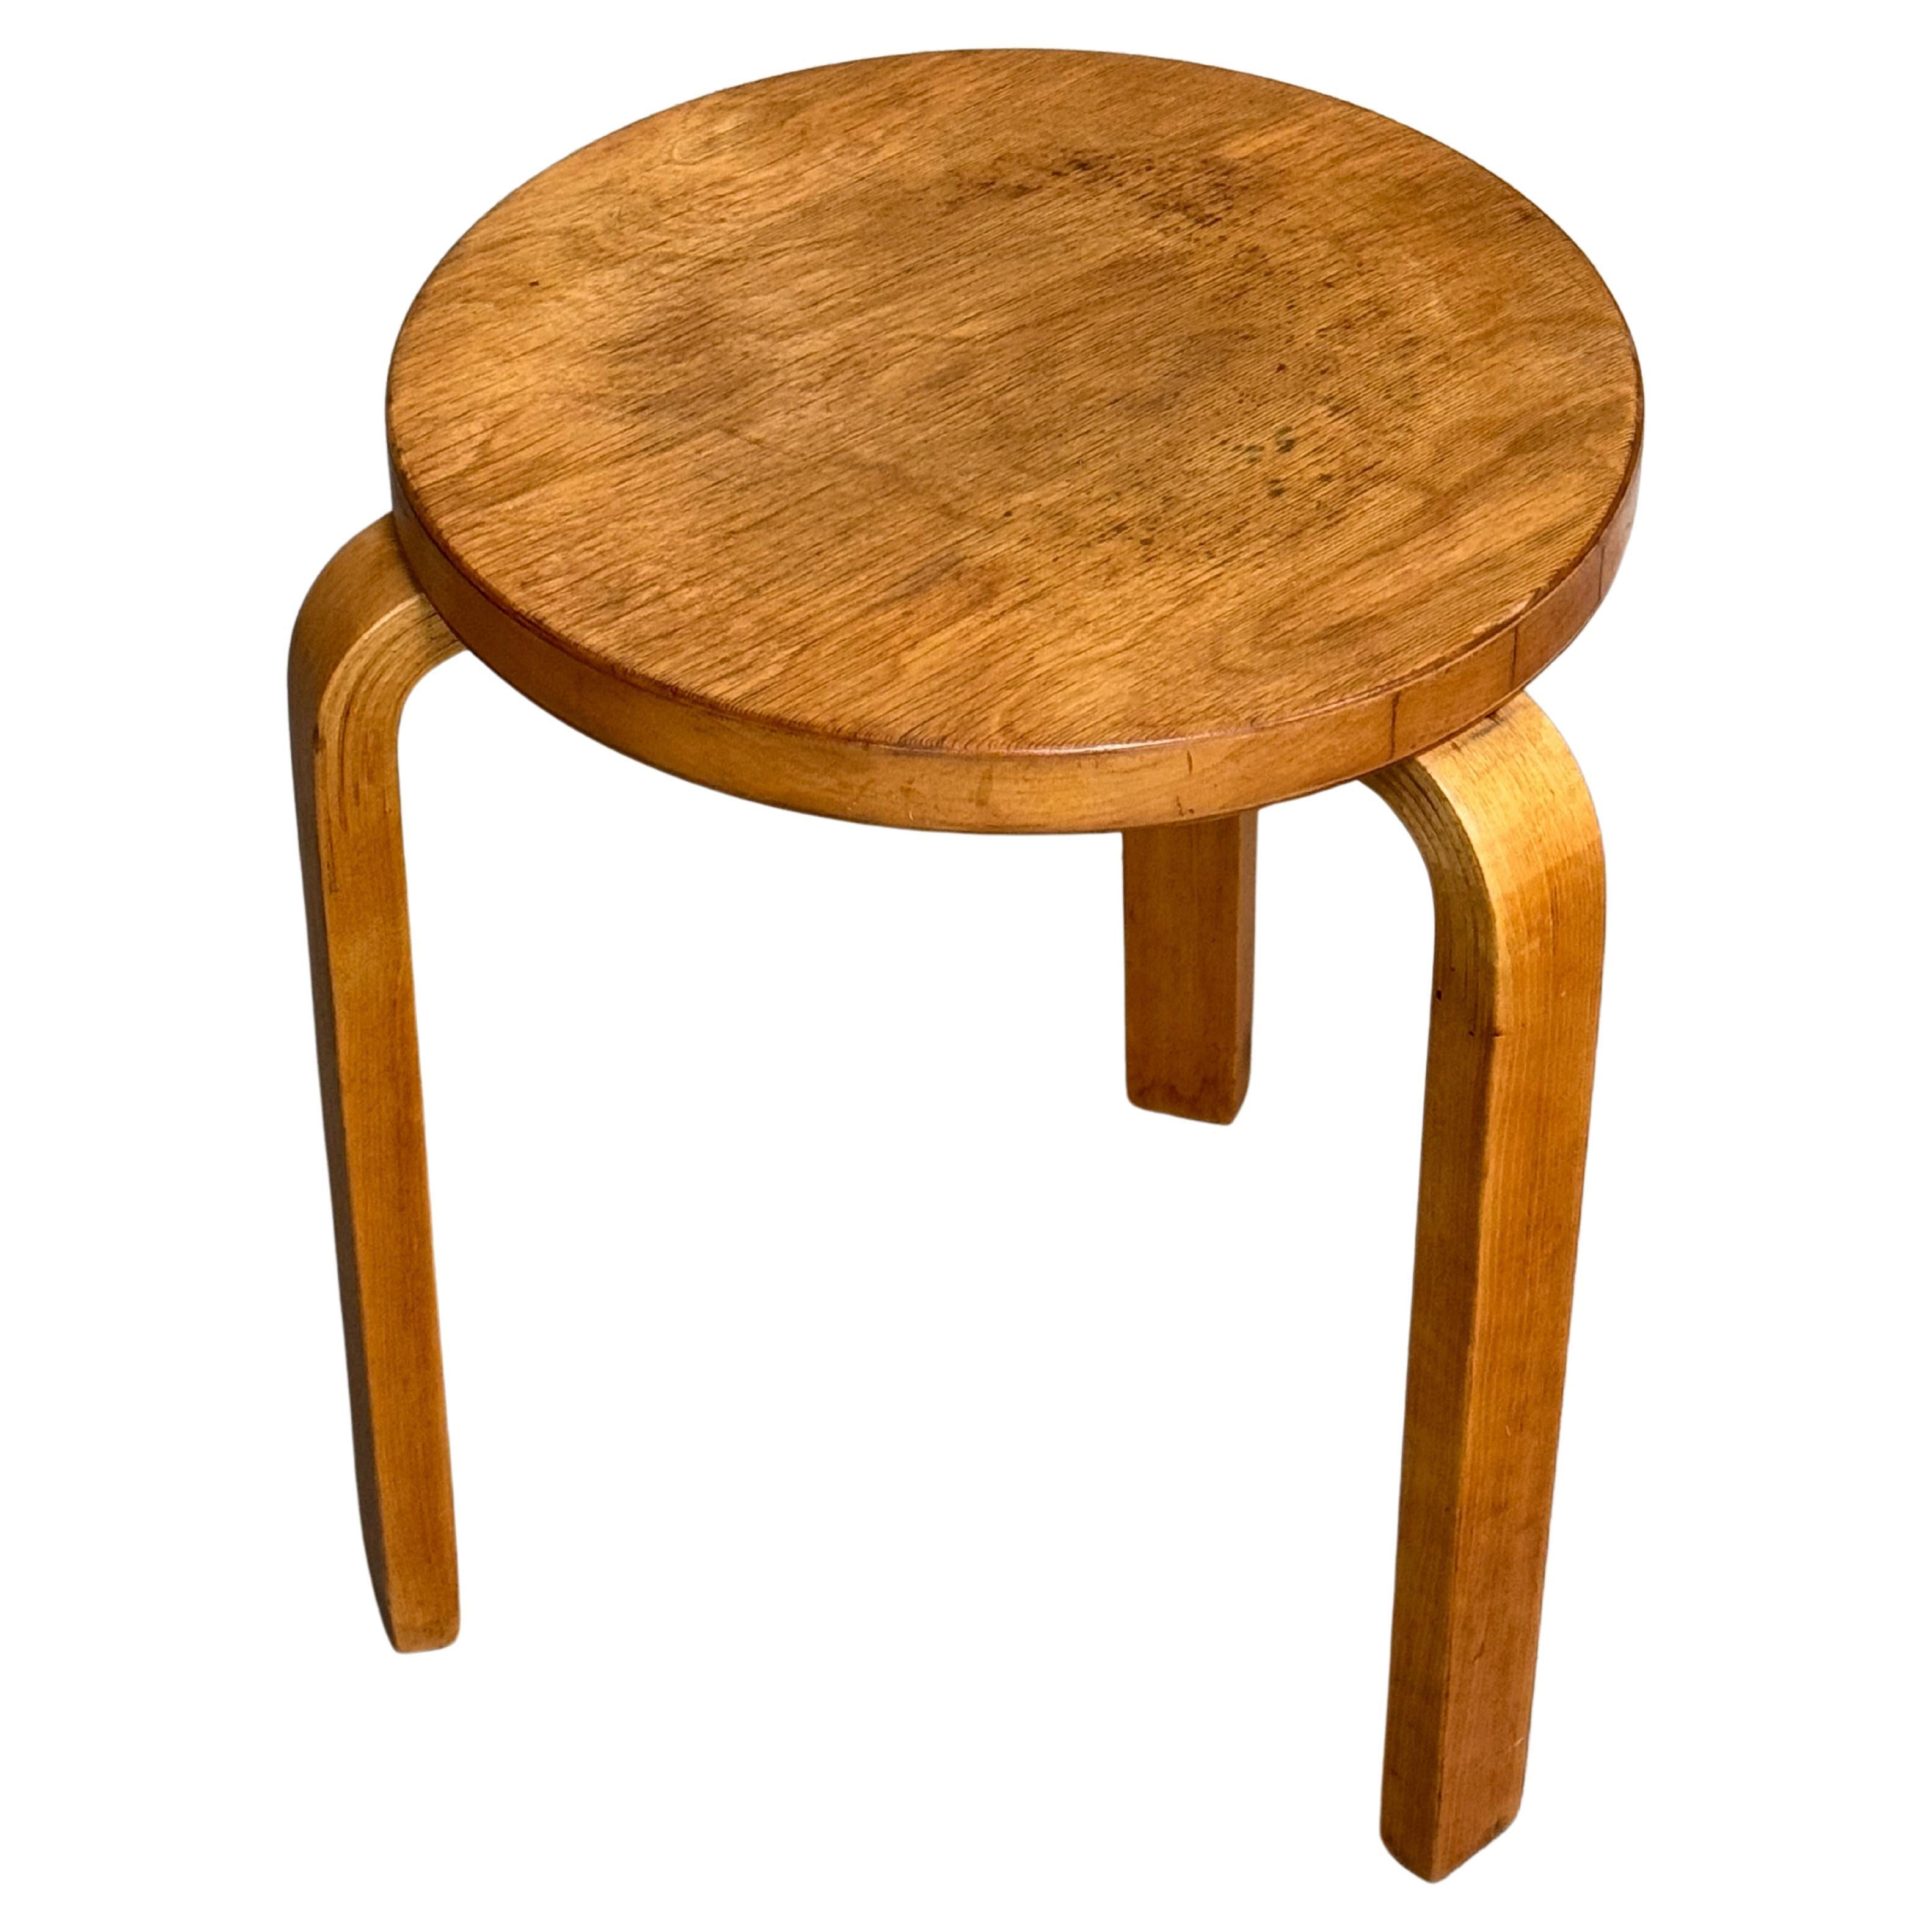 Early Production Alvar Aalto Model 60 Stool Finsven Late 1940s For Sale